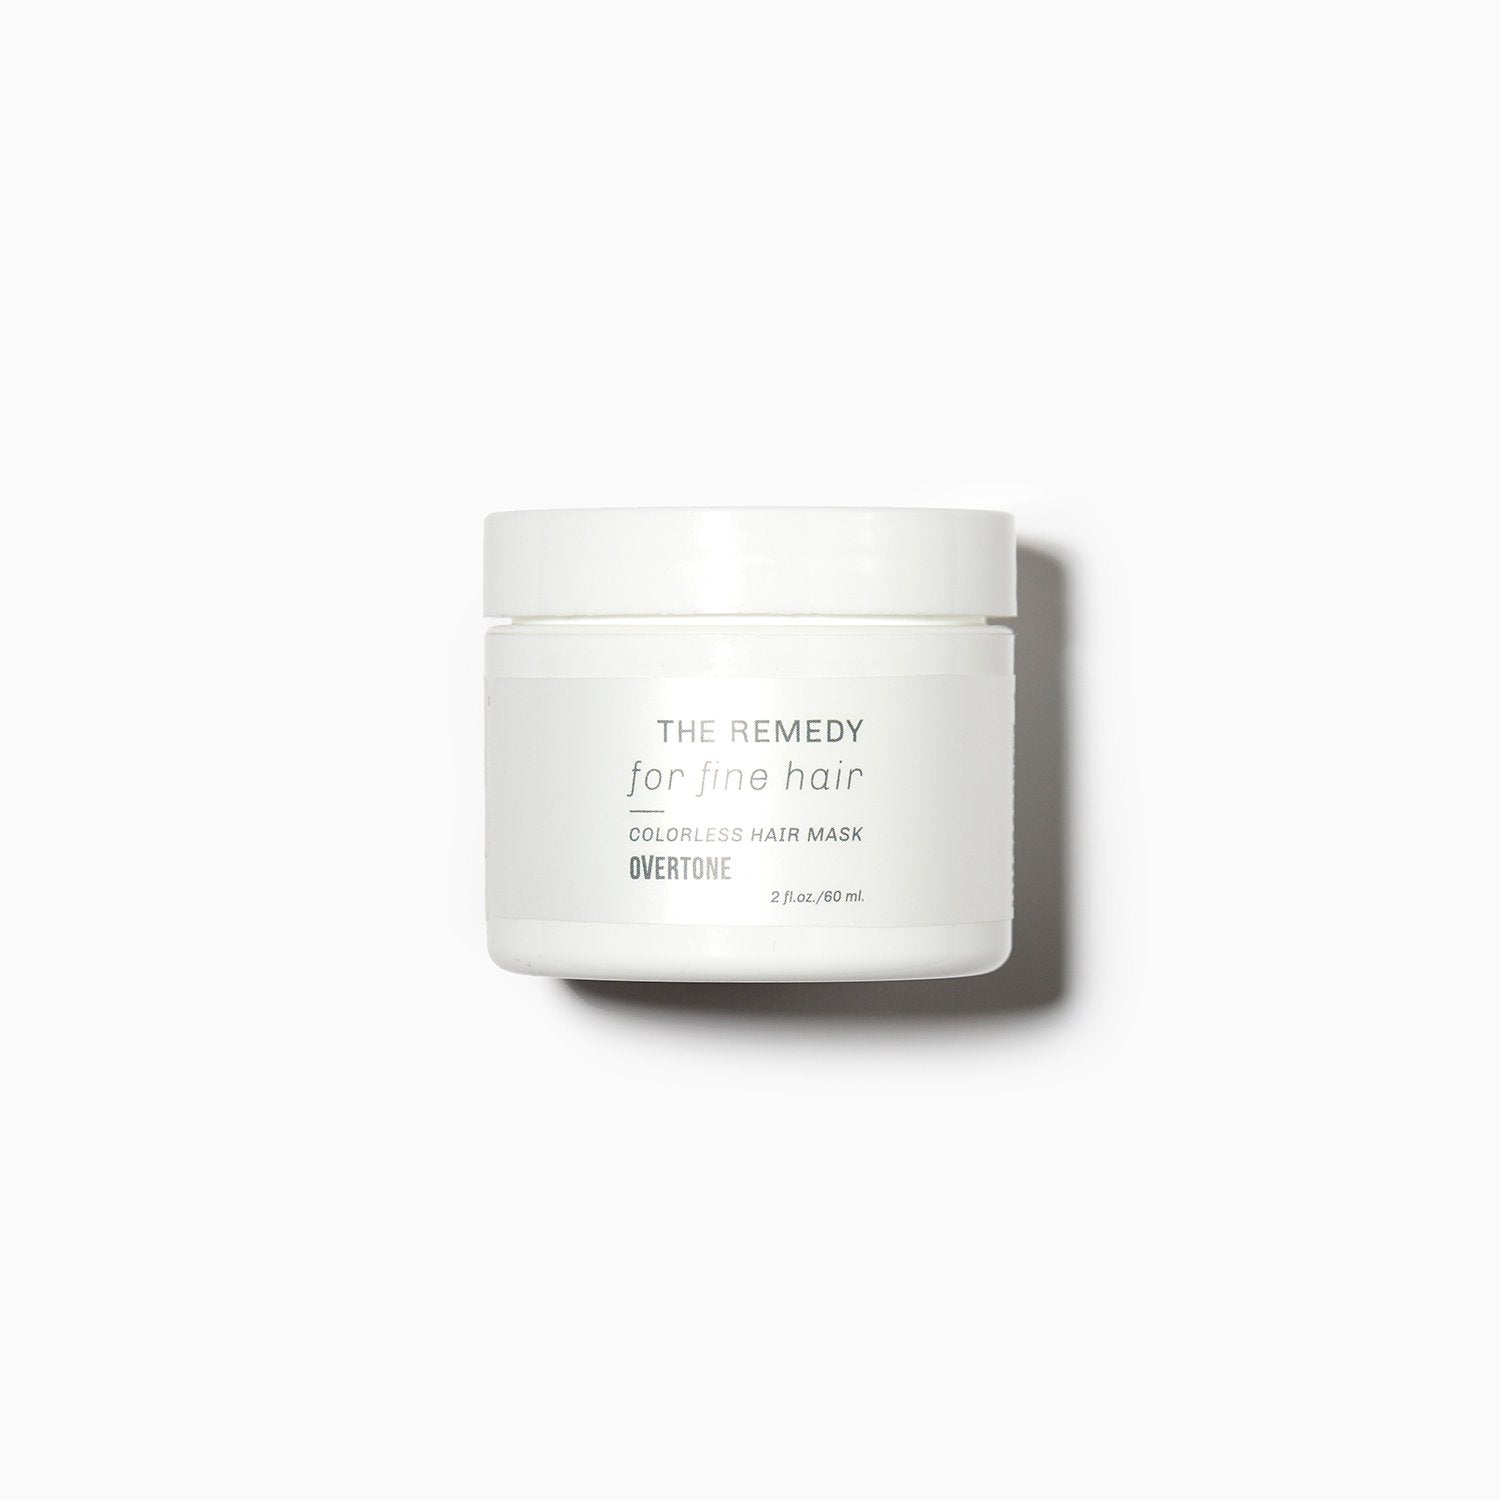 oVertone The Remedy for Fine Hair Colorless Hair Mask sample size